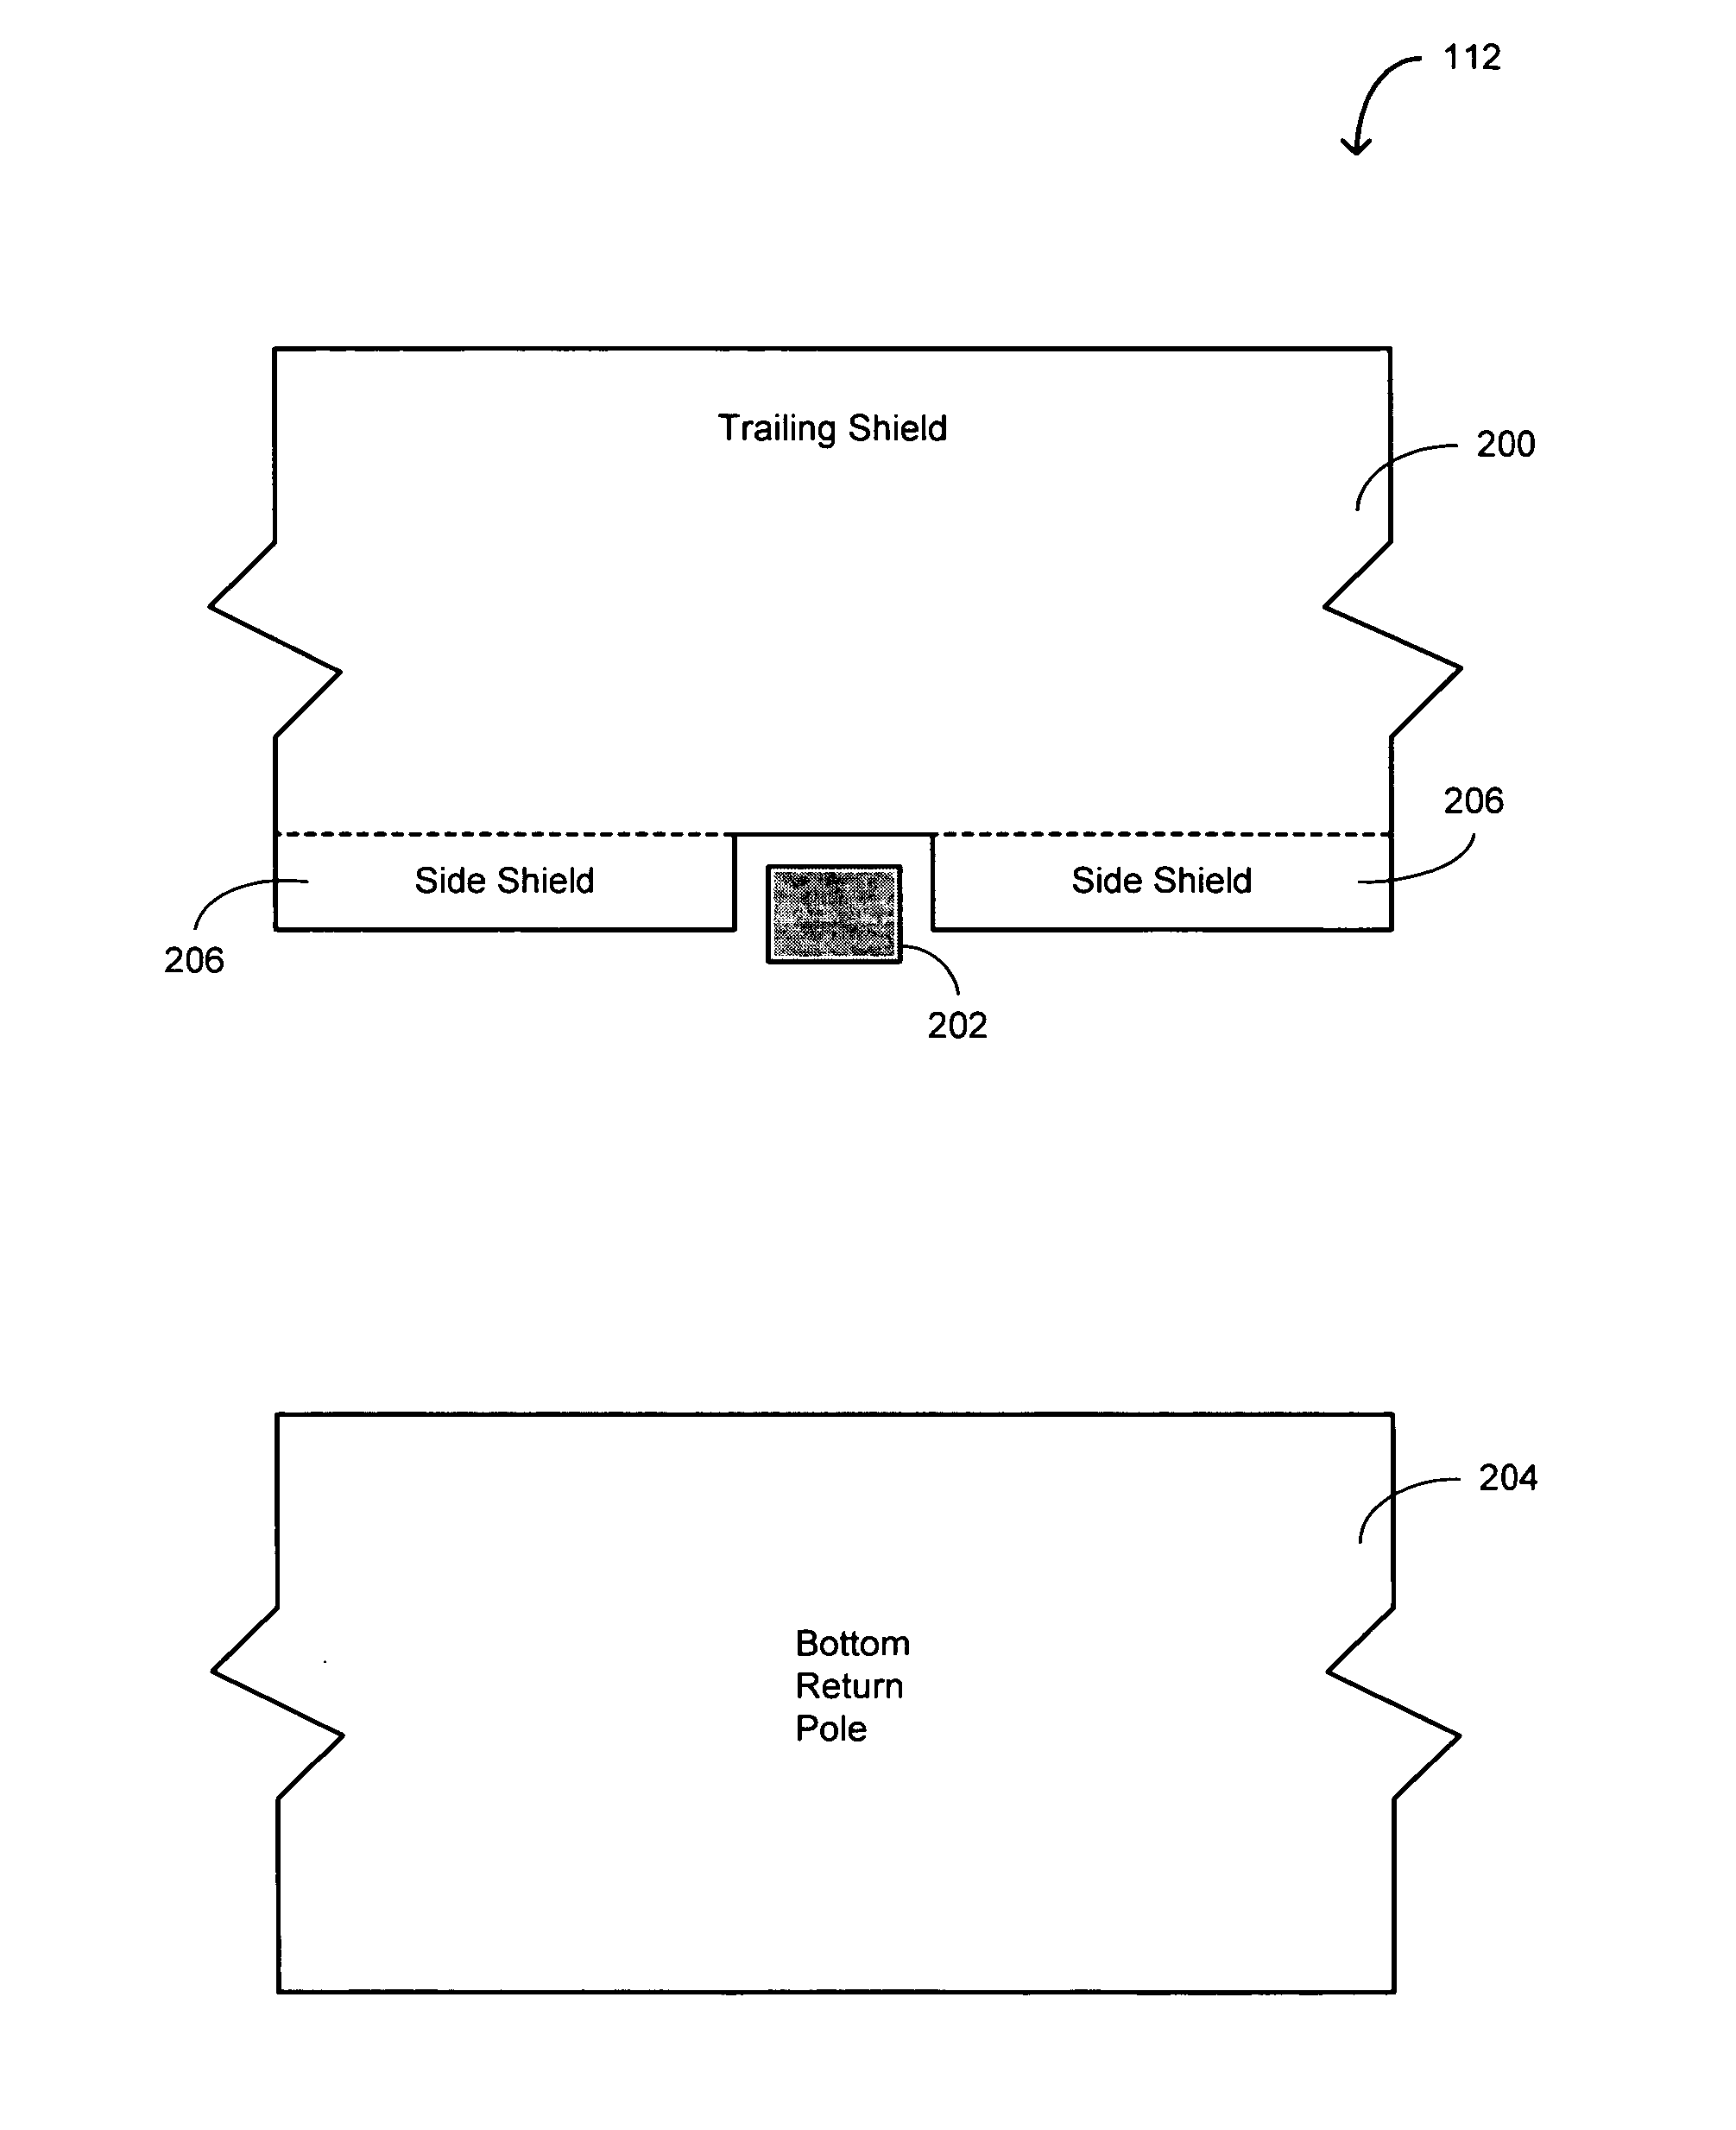 Perpendicular head with self-aligned notching trailing shield process